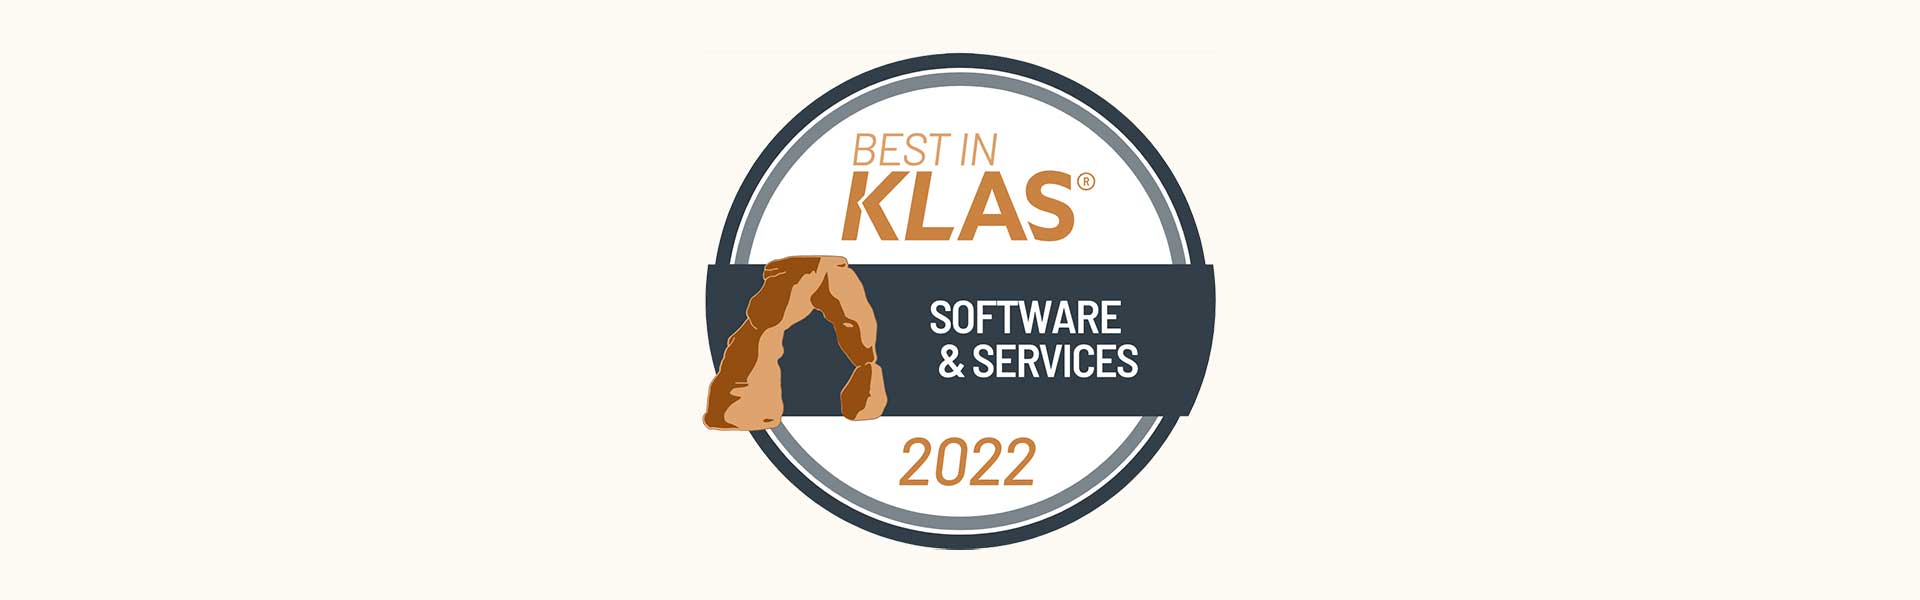 Best in KLAS 2022 Software and Services